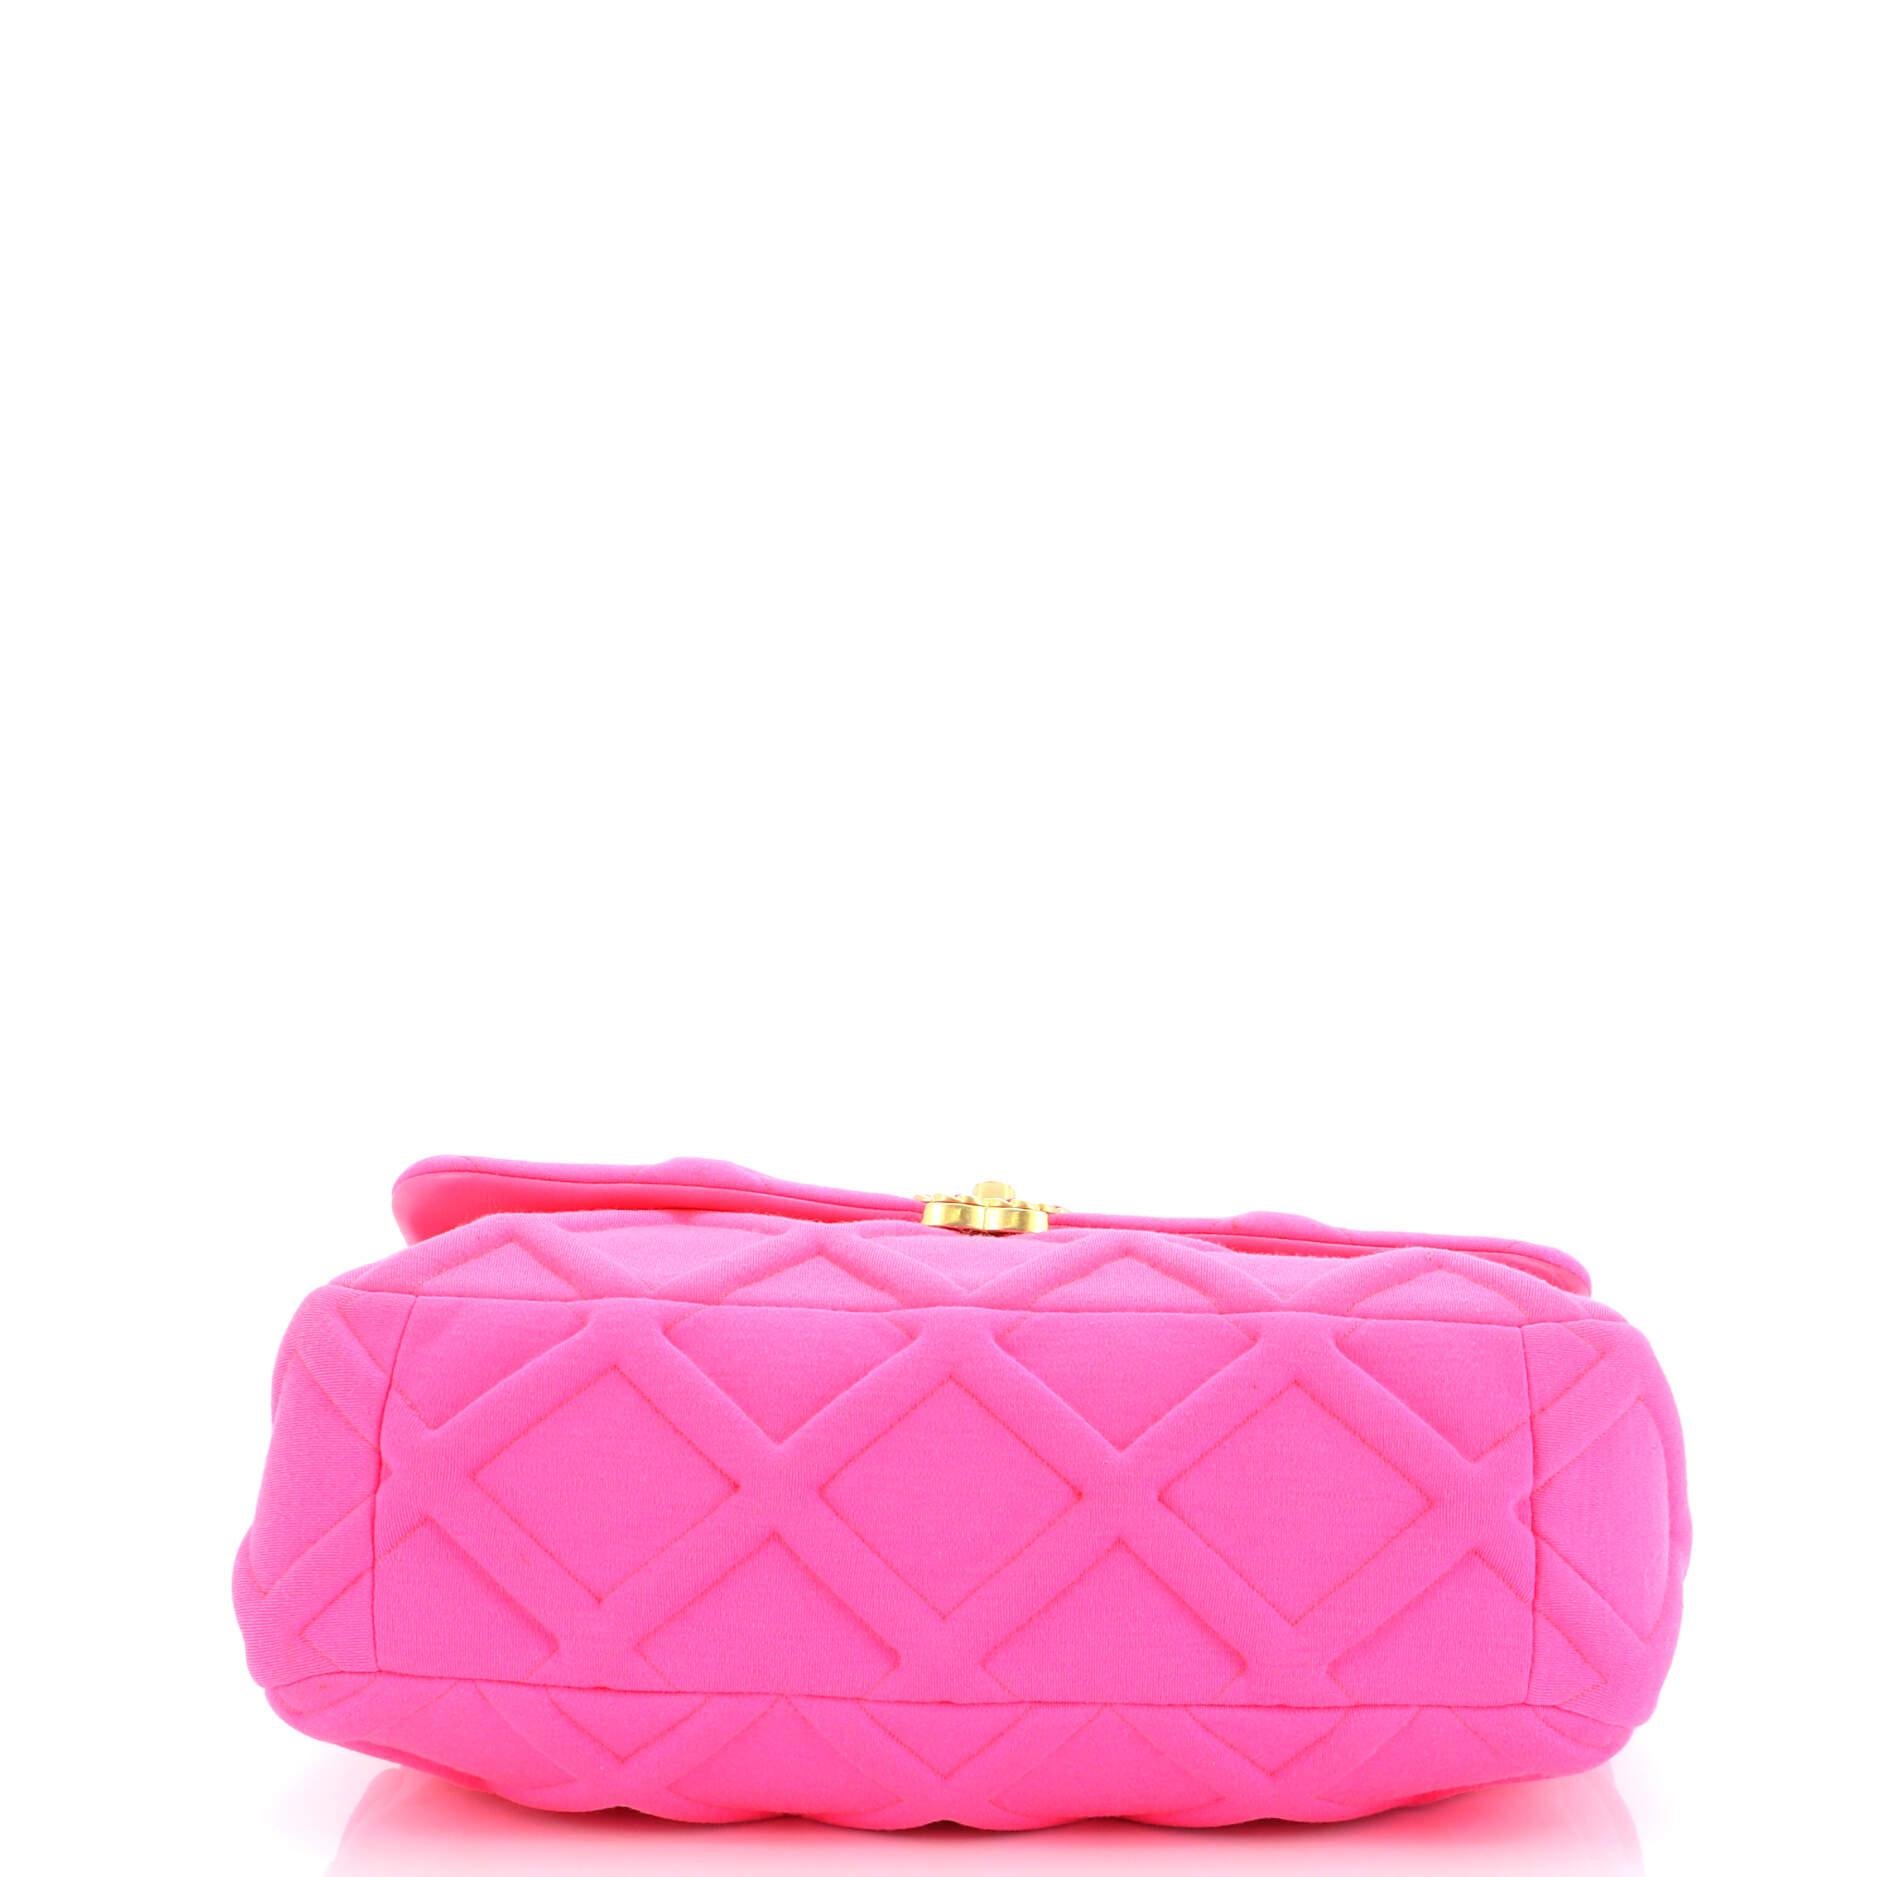 Chanel 19 Flap Bag Quilted Jersey Maxi 1